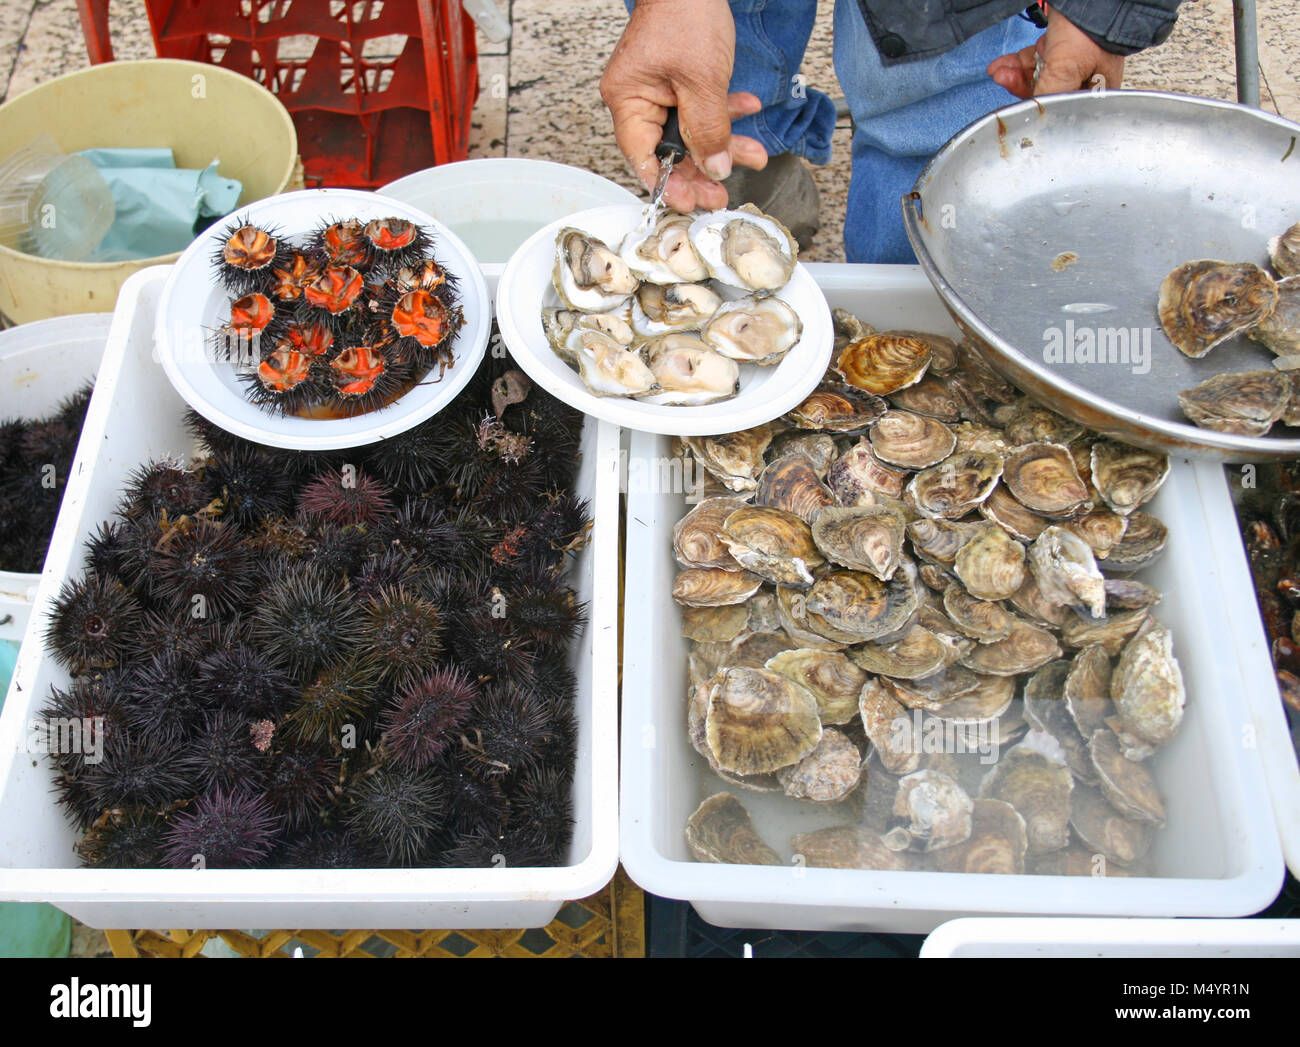 Local fisherman selling sea urchins and oysters ready to eat in an open air street food market on Bari promenade, Puglia, Italy Stock Photo